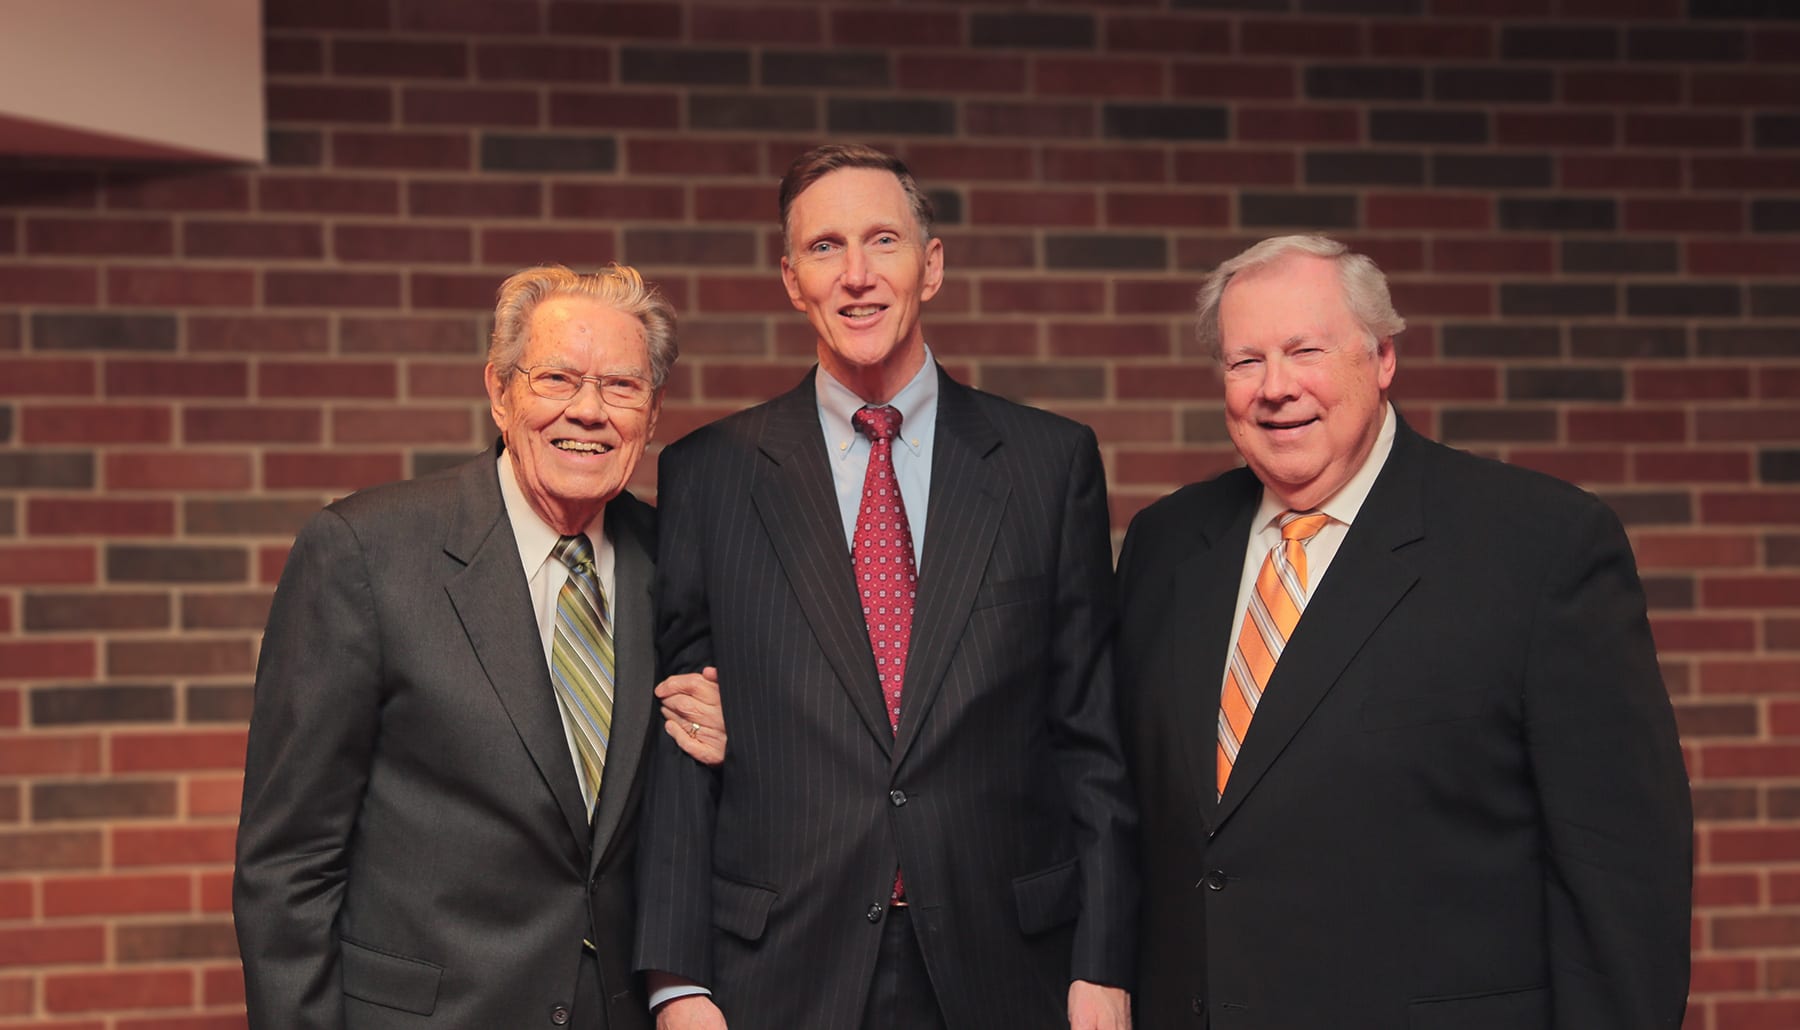 President Nicholson, Edwards, and Pistole posing for a photo with a red brick background.